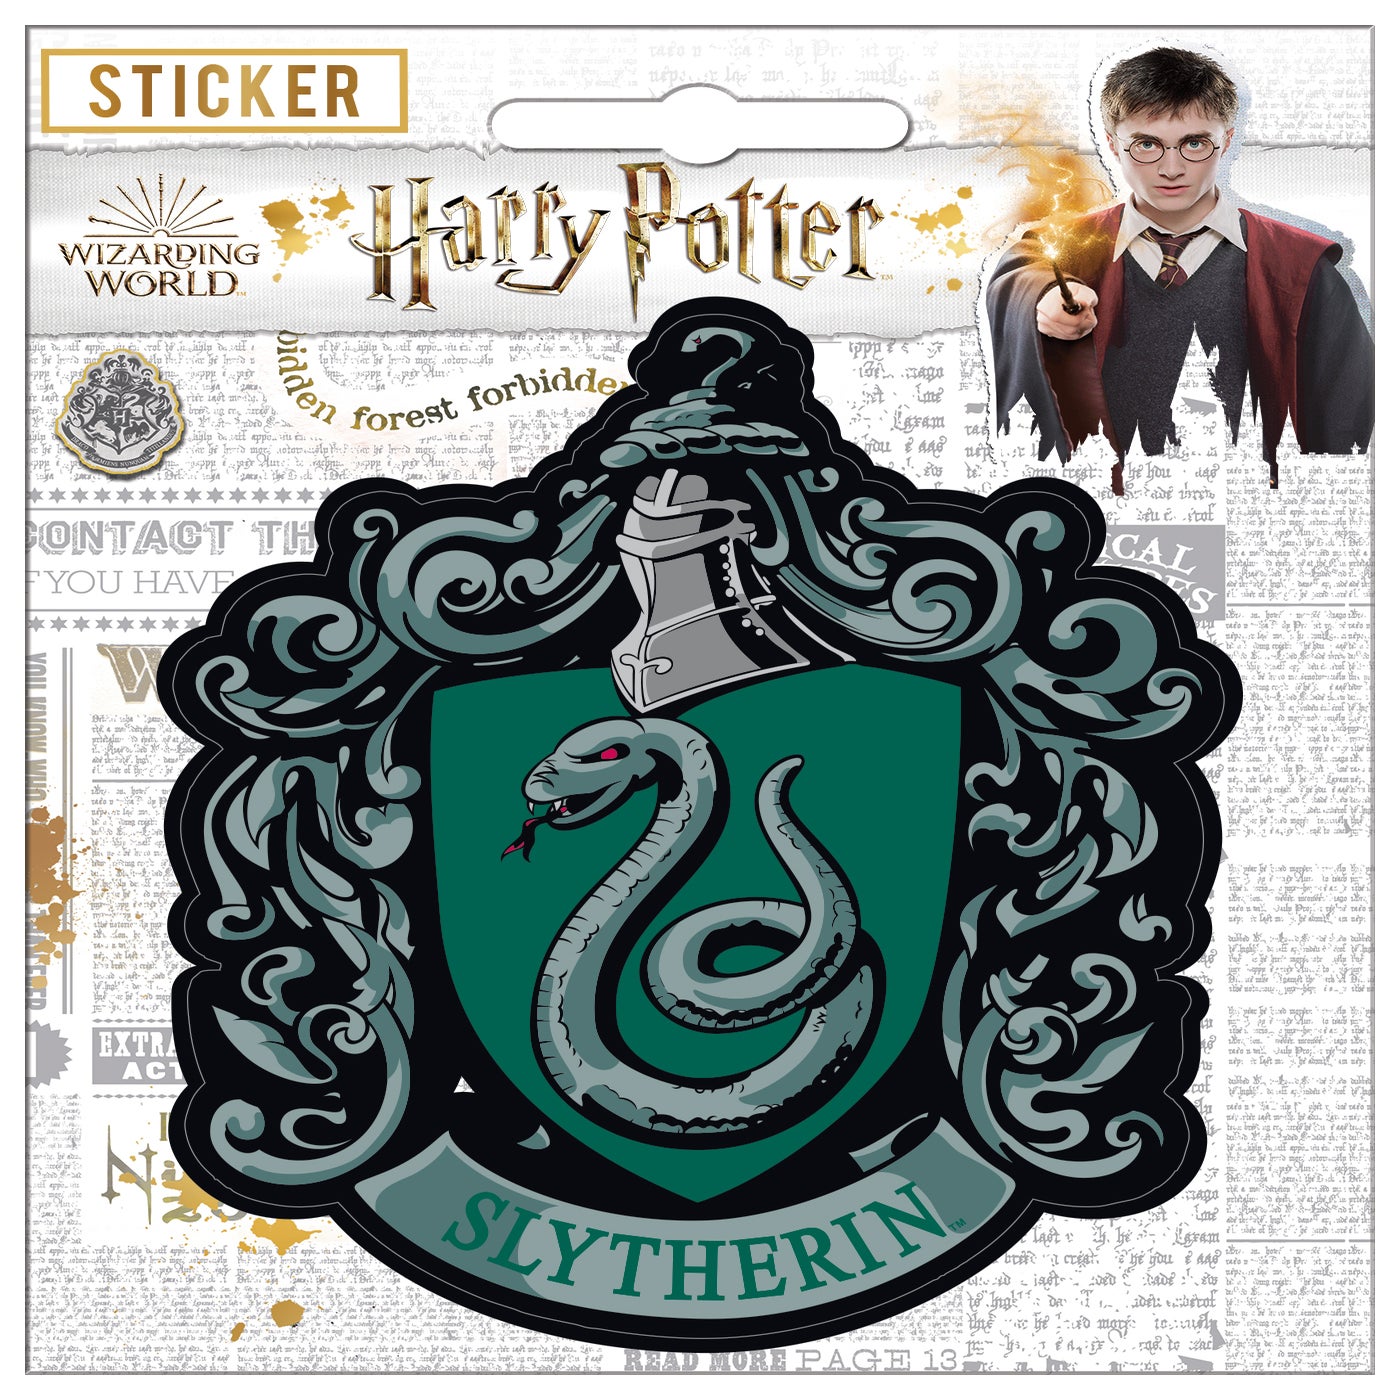 Slytherin Crest Pin